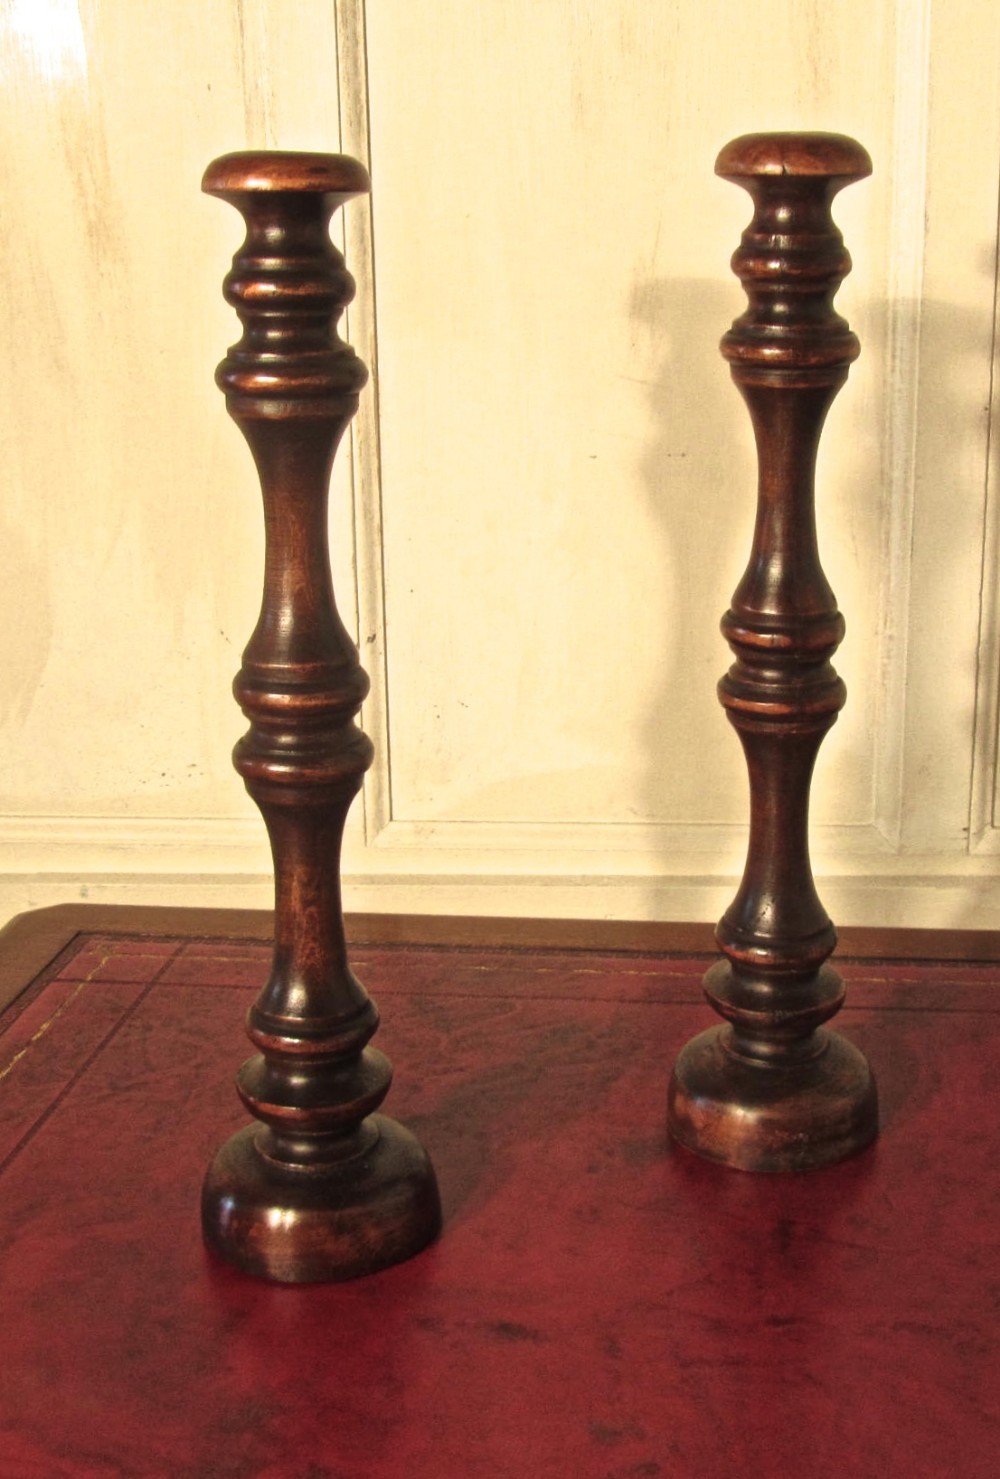 a pair of tall turned wooden wig stands shop display